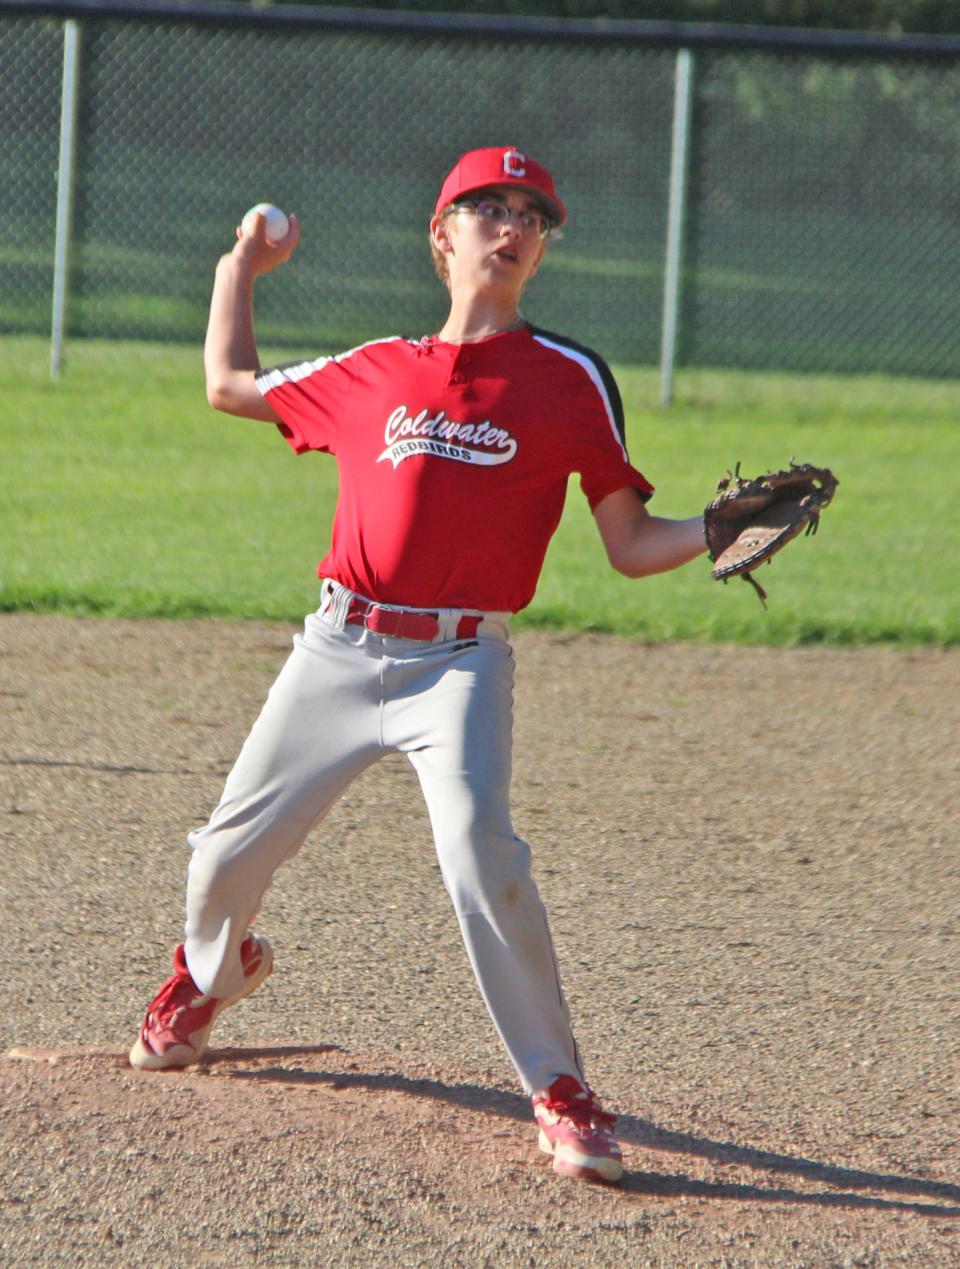 Coldwater's Caiden S. delivers a pitch Friday night in 12U baseball action